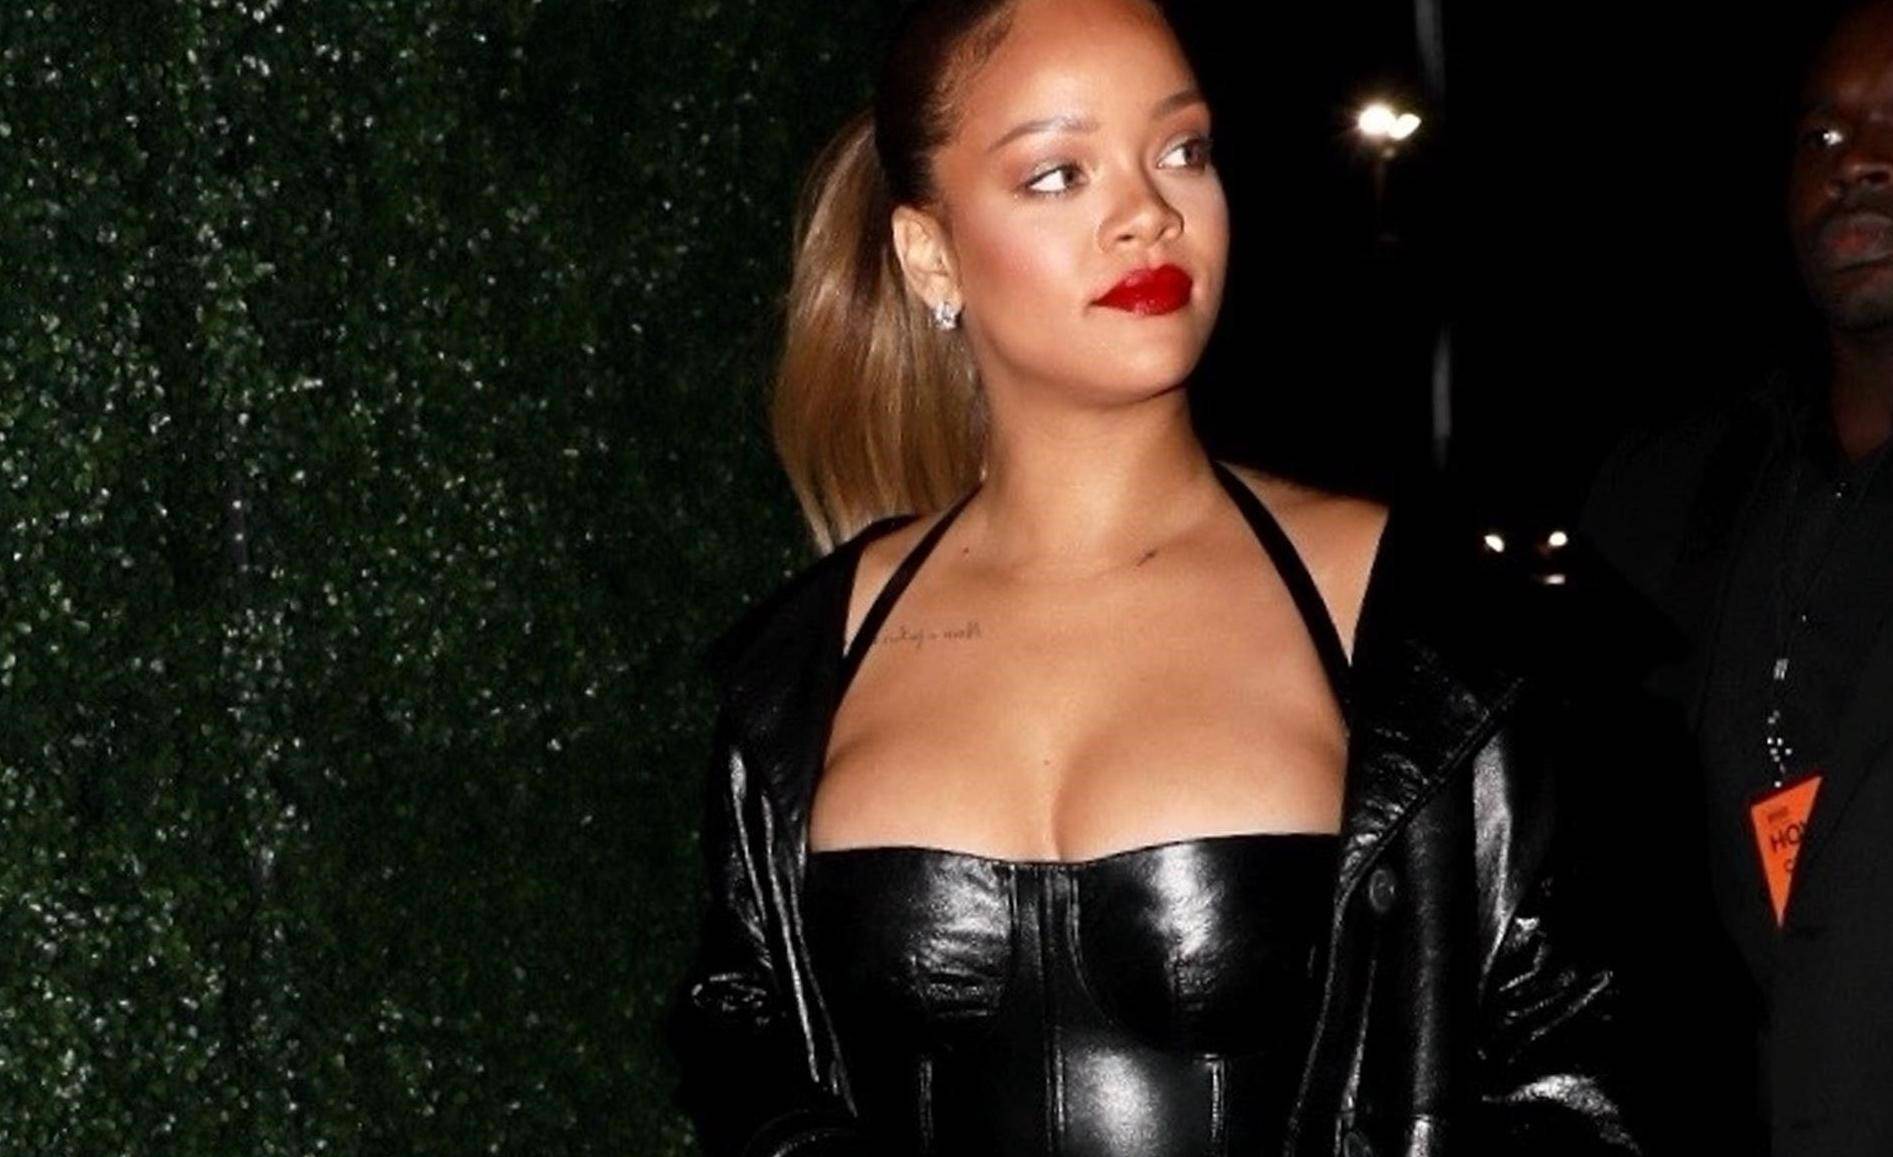 Rihanna wears a revealing little black dress to Jay-Z's show at The Forum